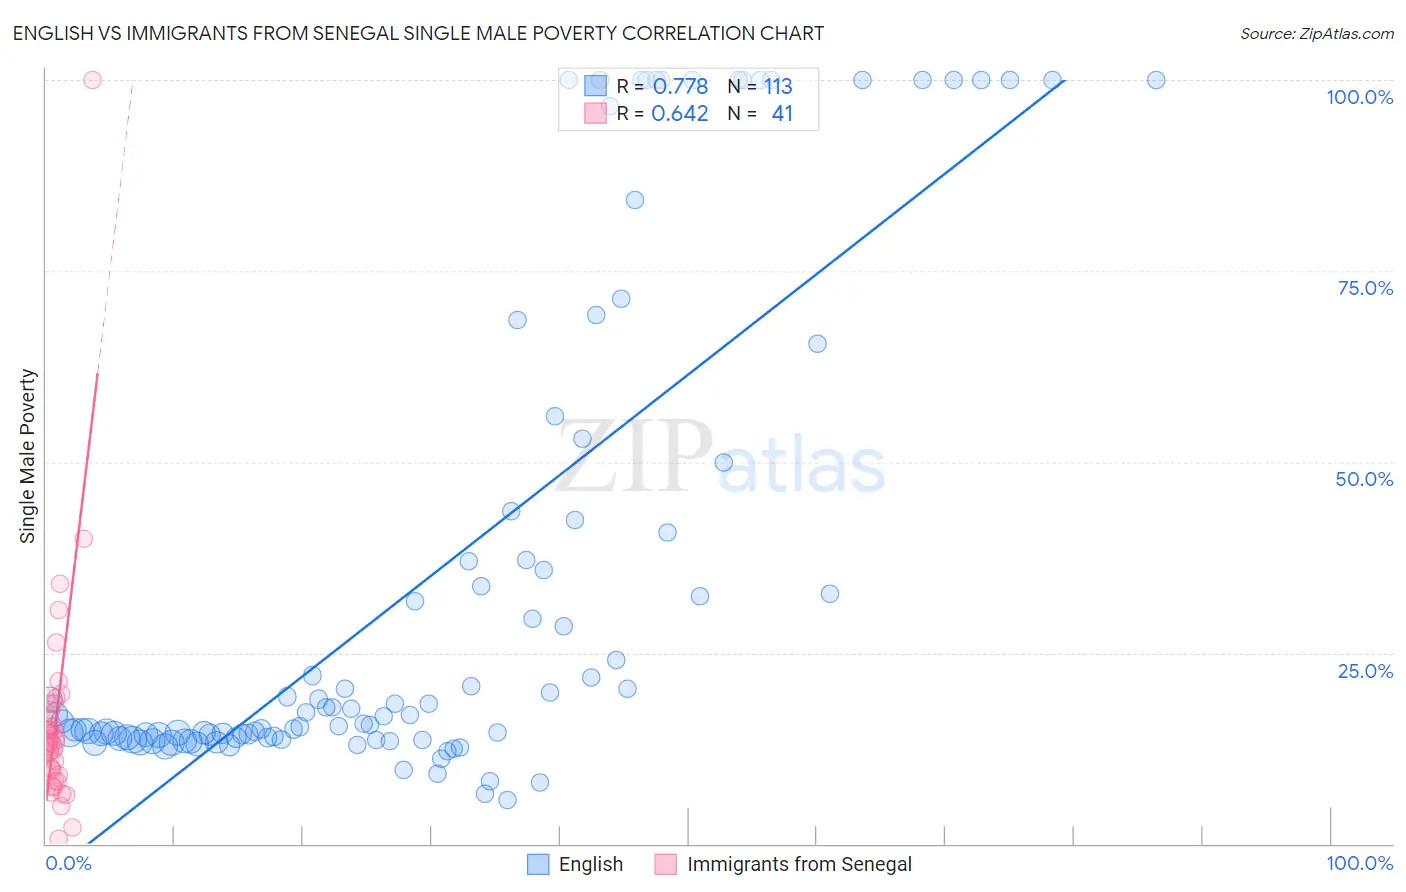 English vs Immigrants from Senegal Single Male Poverty